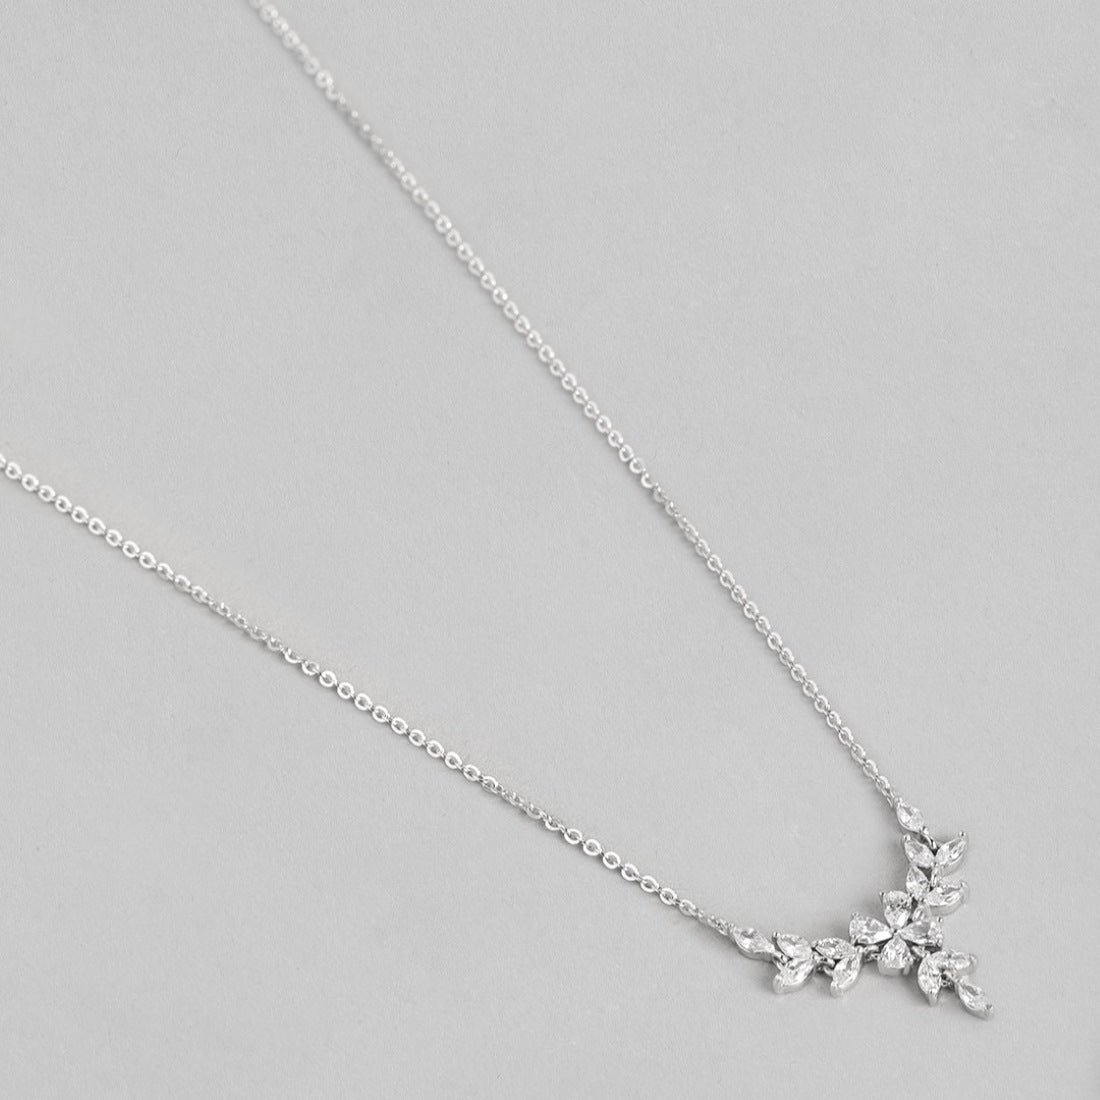 Floral Harmony Elegance Rhodium-Plated 925 Sterling Necklace